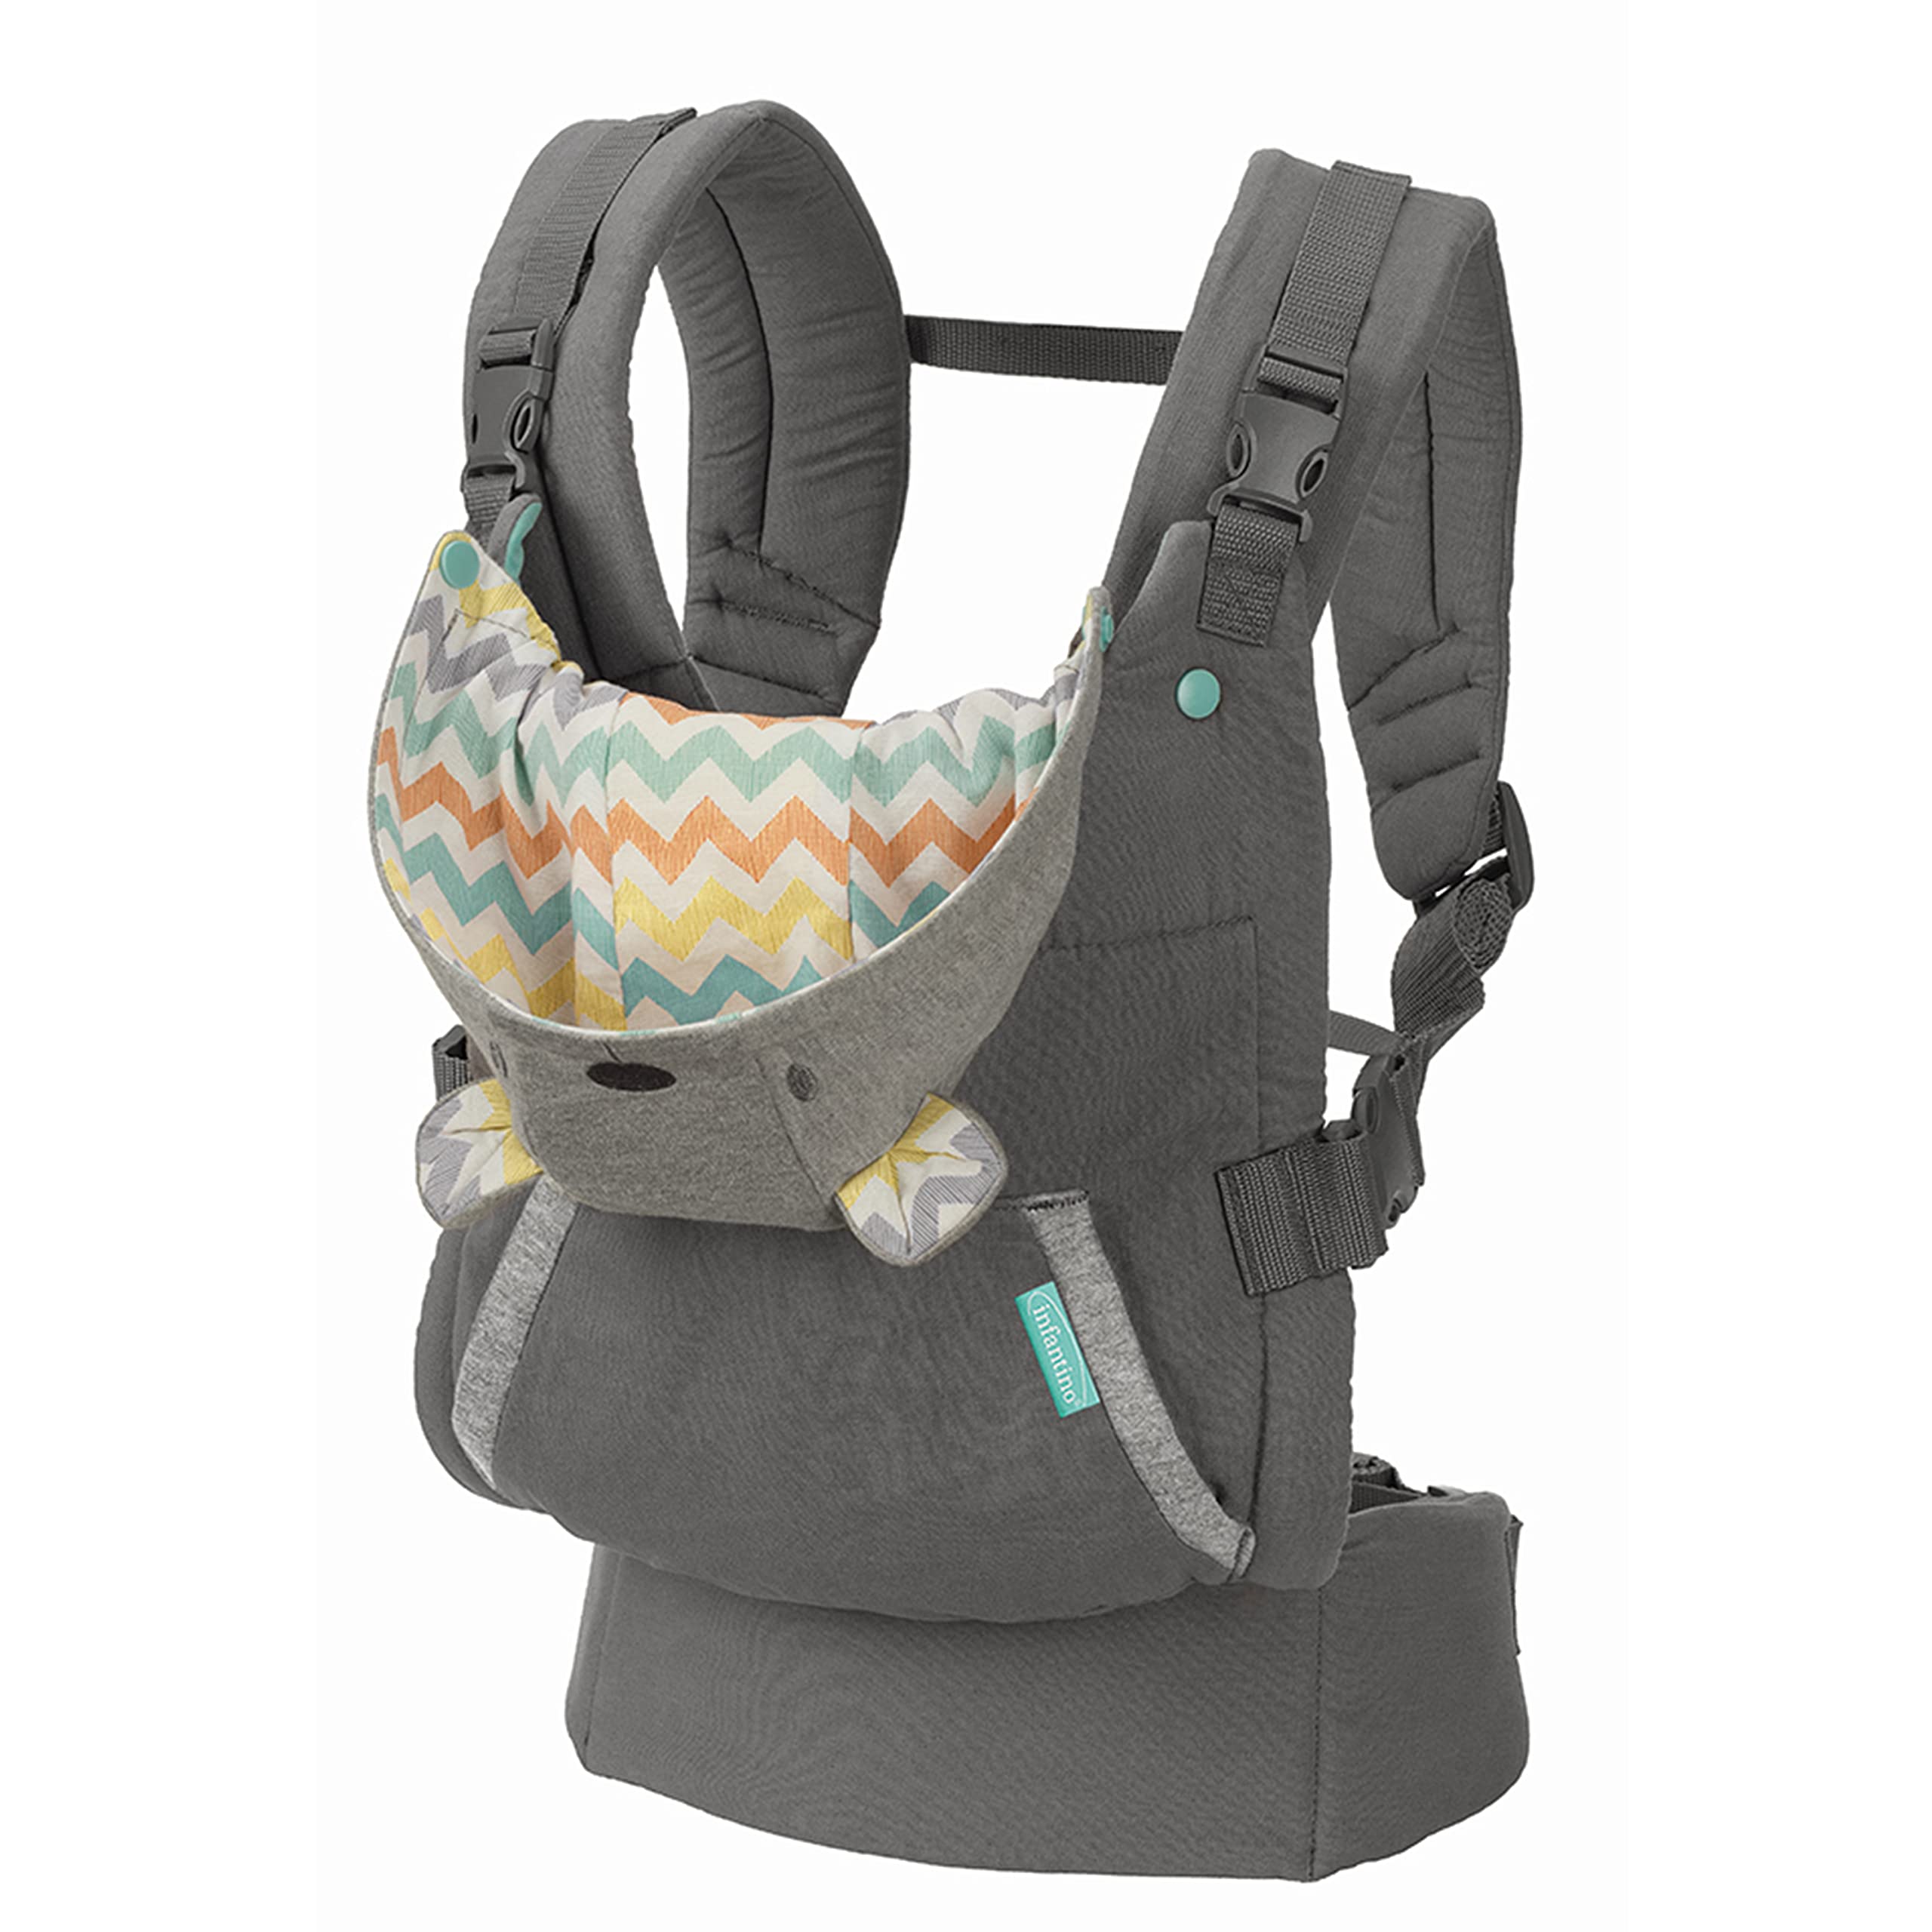 Infantino Cuddle Up Carrier - Ergonomic Bear-Themed face-in Front Carry and Back Carry with Removable Character Hood for Infants and Toddlers 12-40 lbs